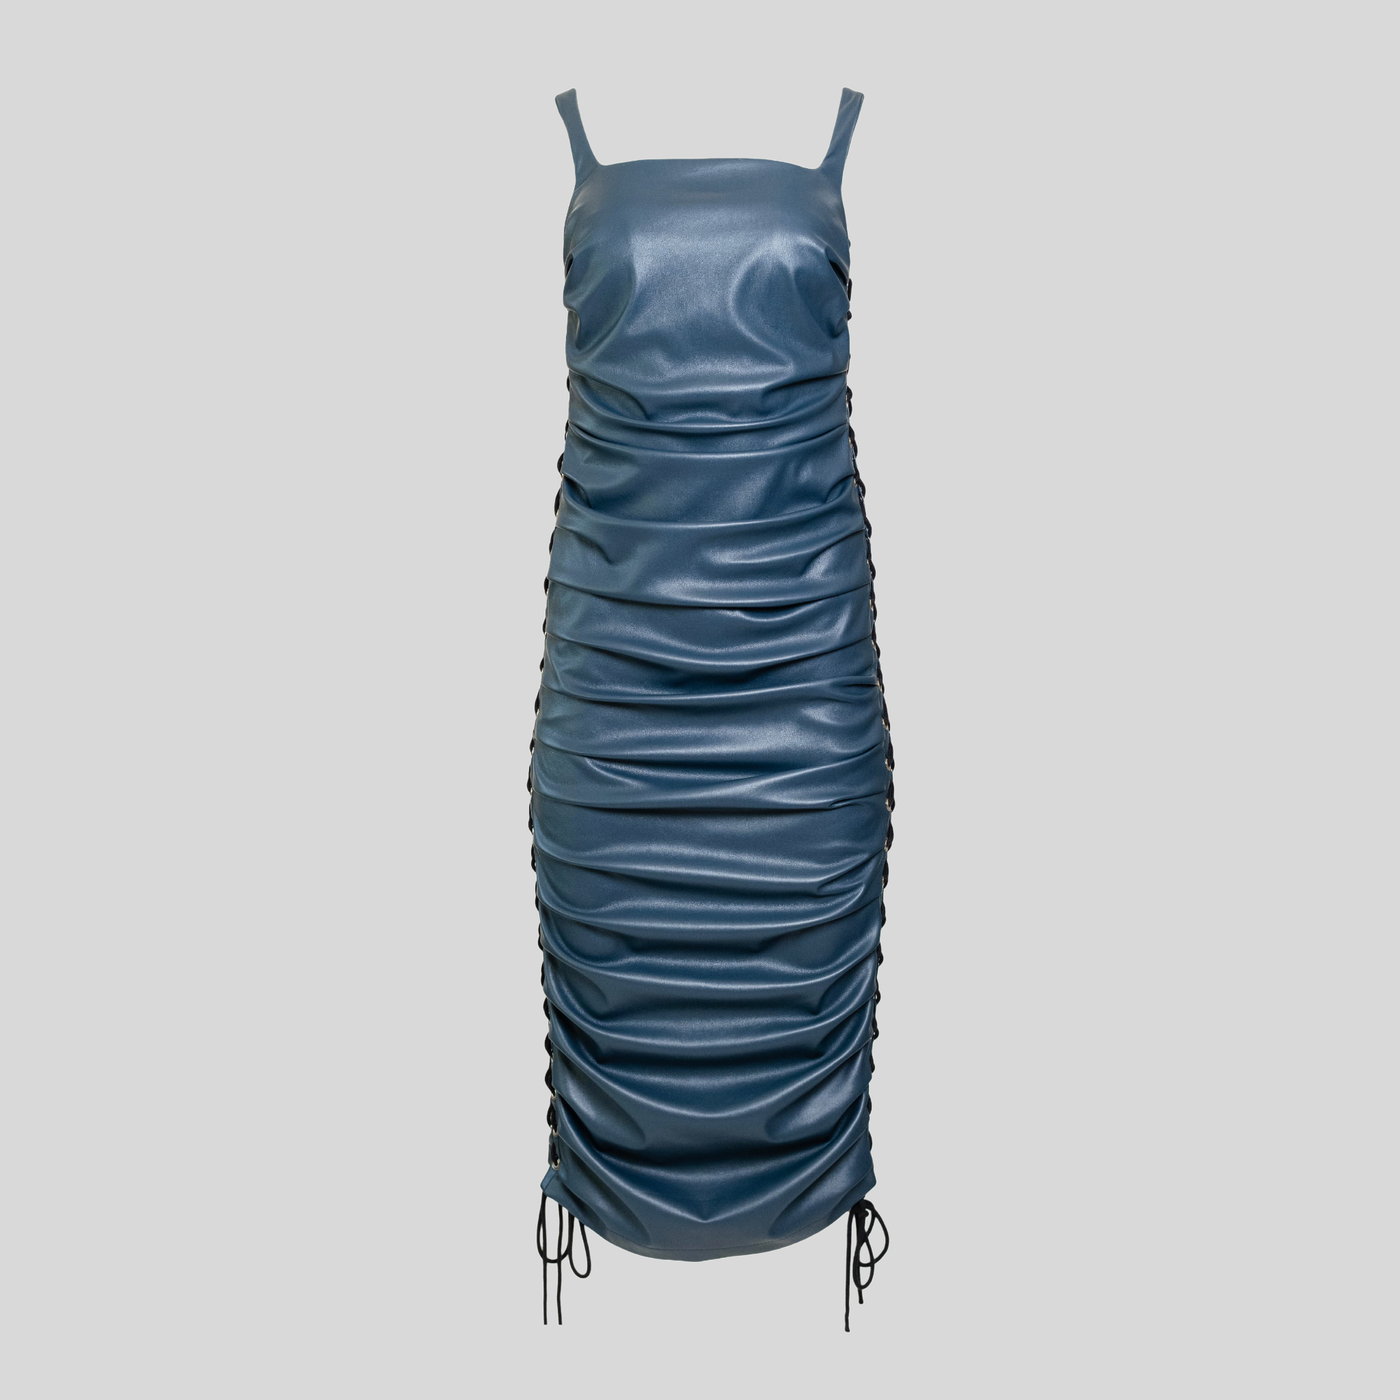 Gotstyle Fashion - Hilary MacMillan Dresses Ruched Lace Up Vegan Leather Dress - Teal